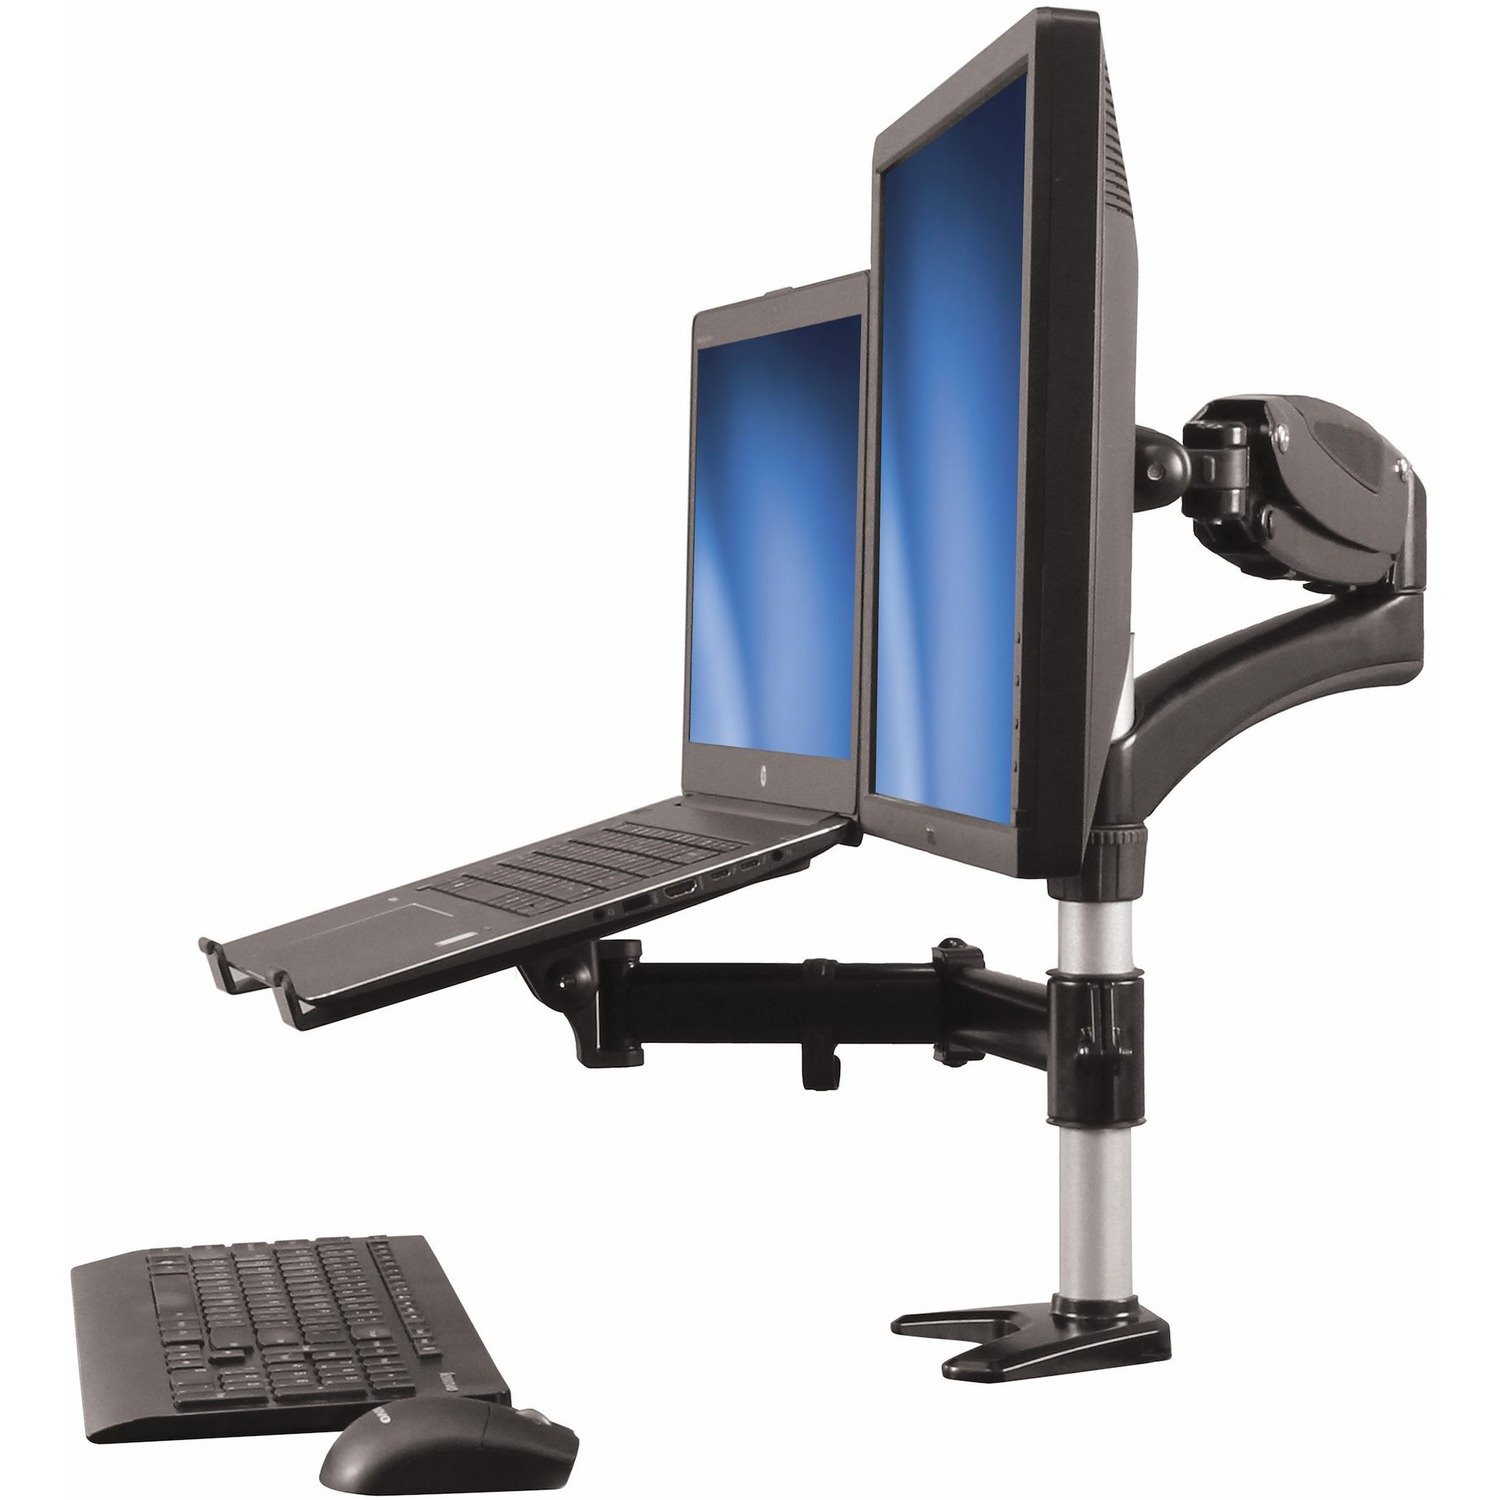 StarTech.com Mounting Arm for Monitor, Notebook, Docking Station, Keyboard, Mouse - Black